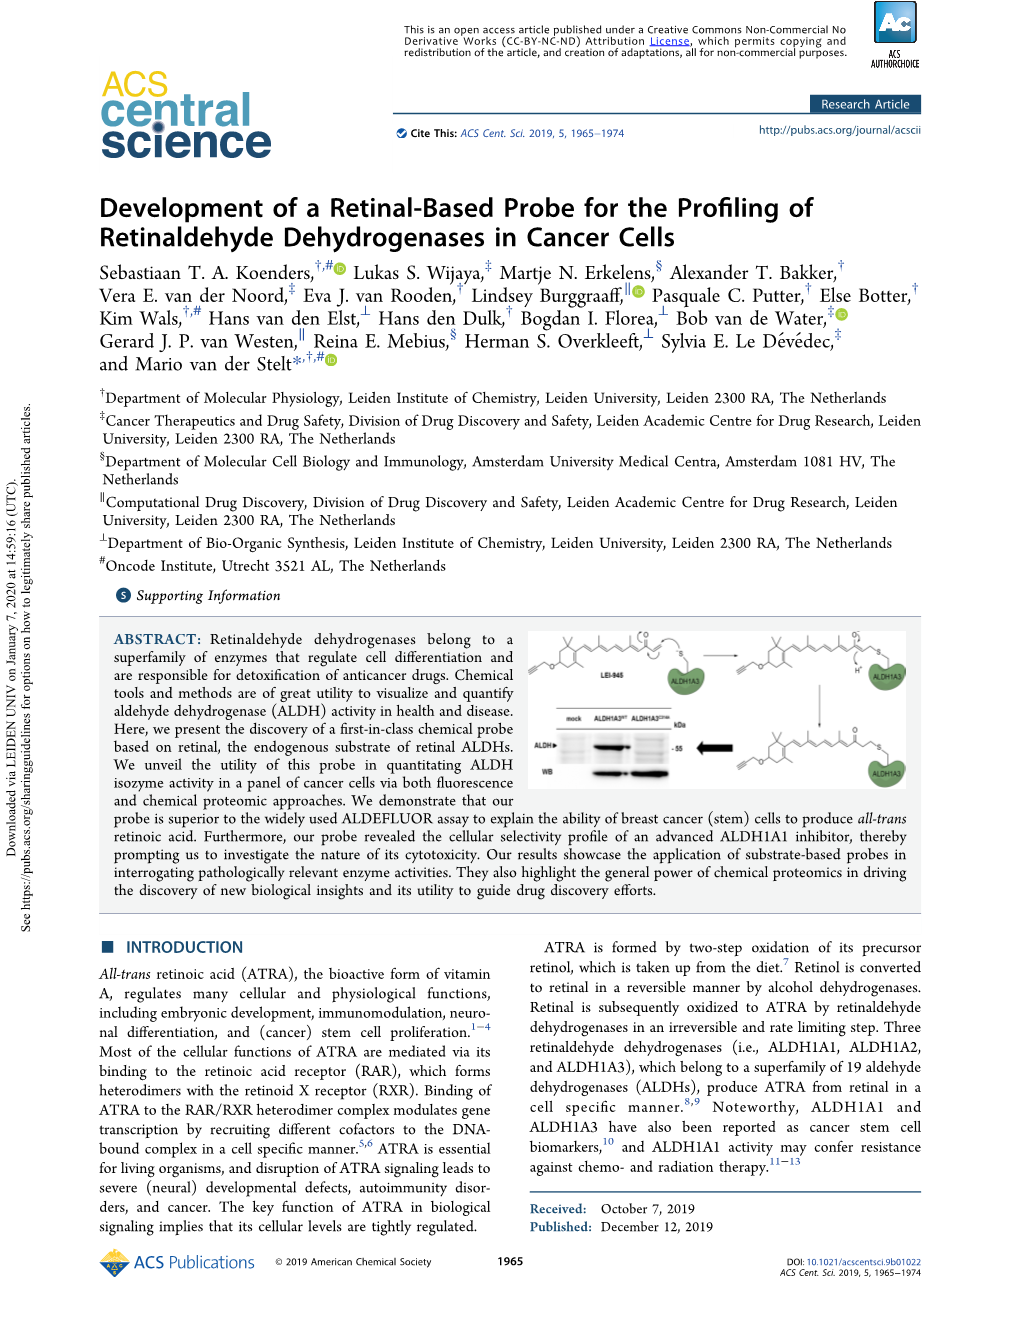 Development of a Retinal-Based Probe for the Profiling Of